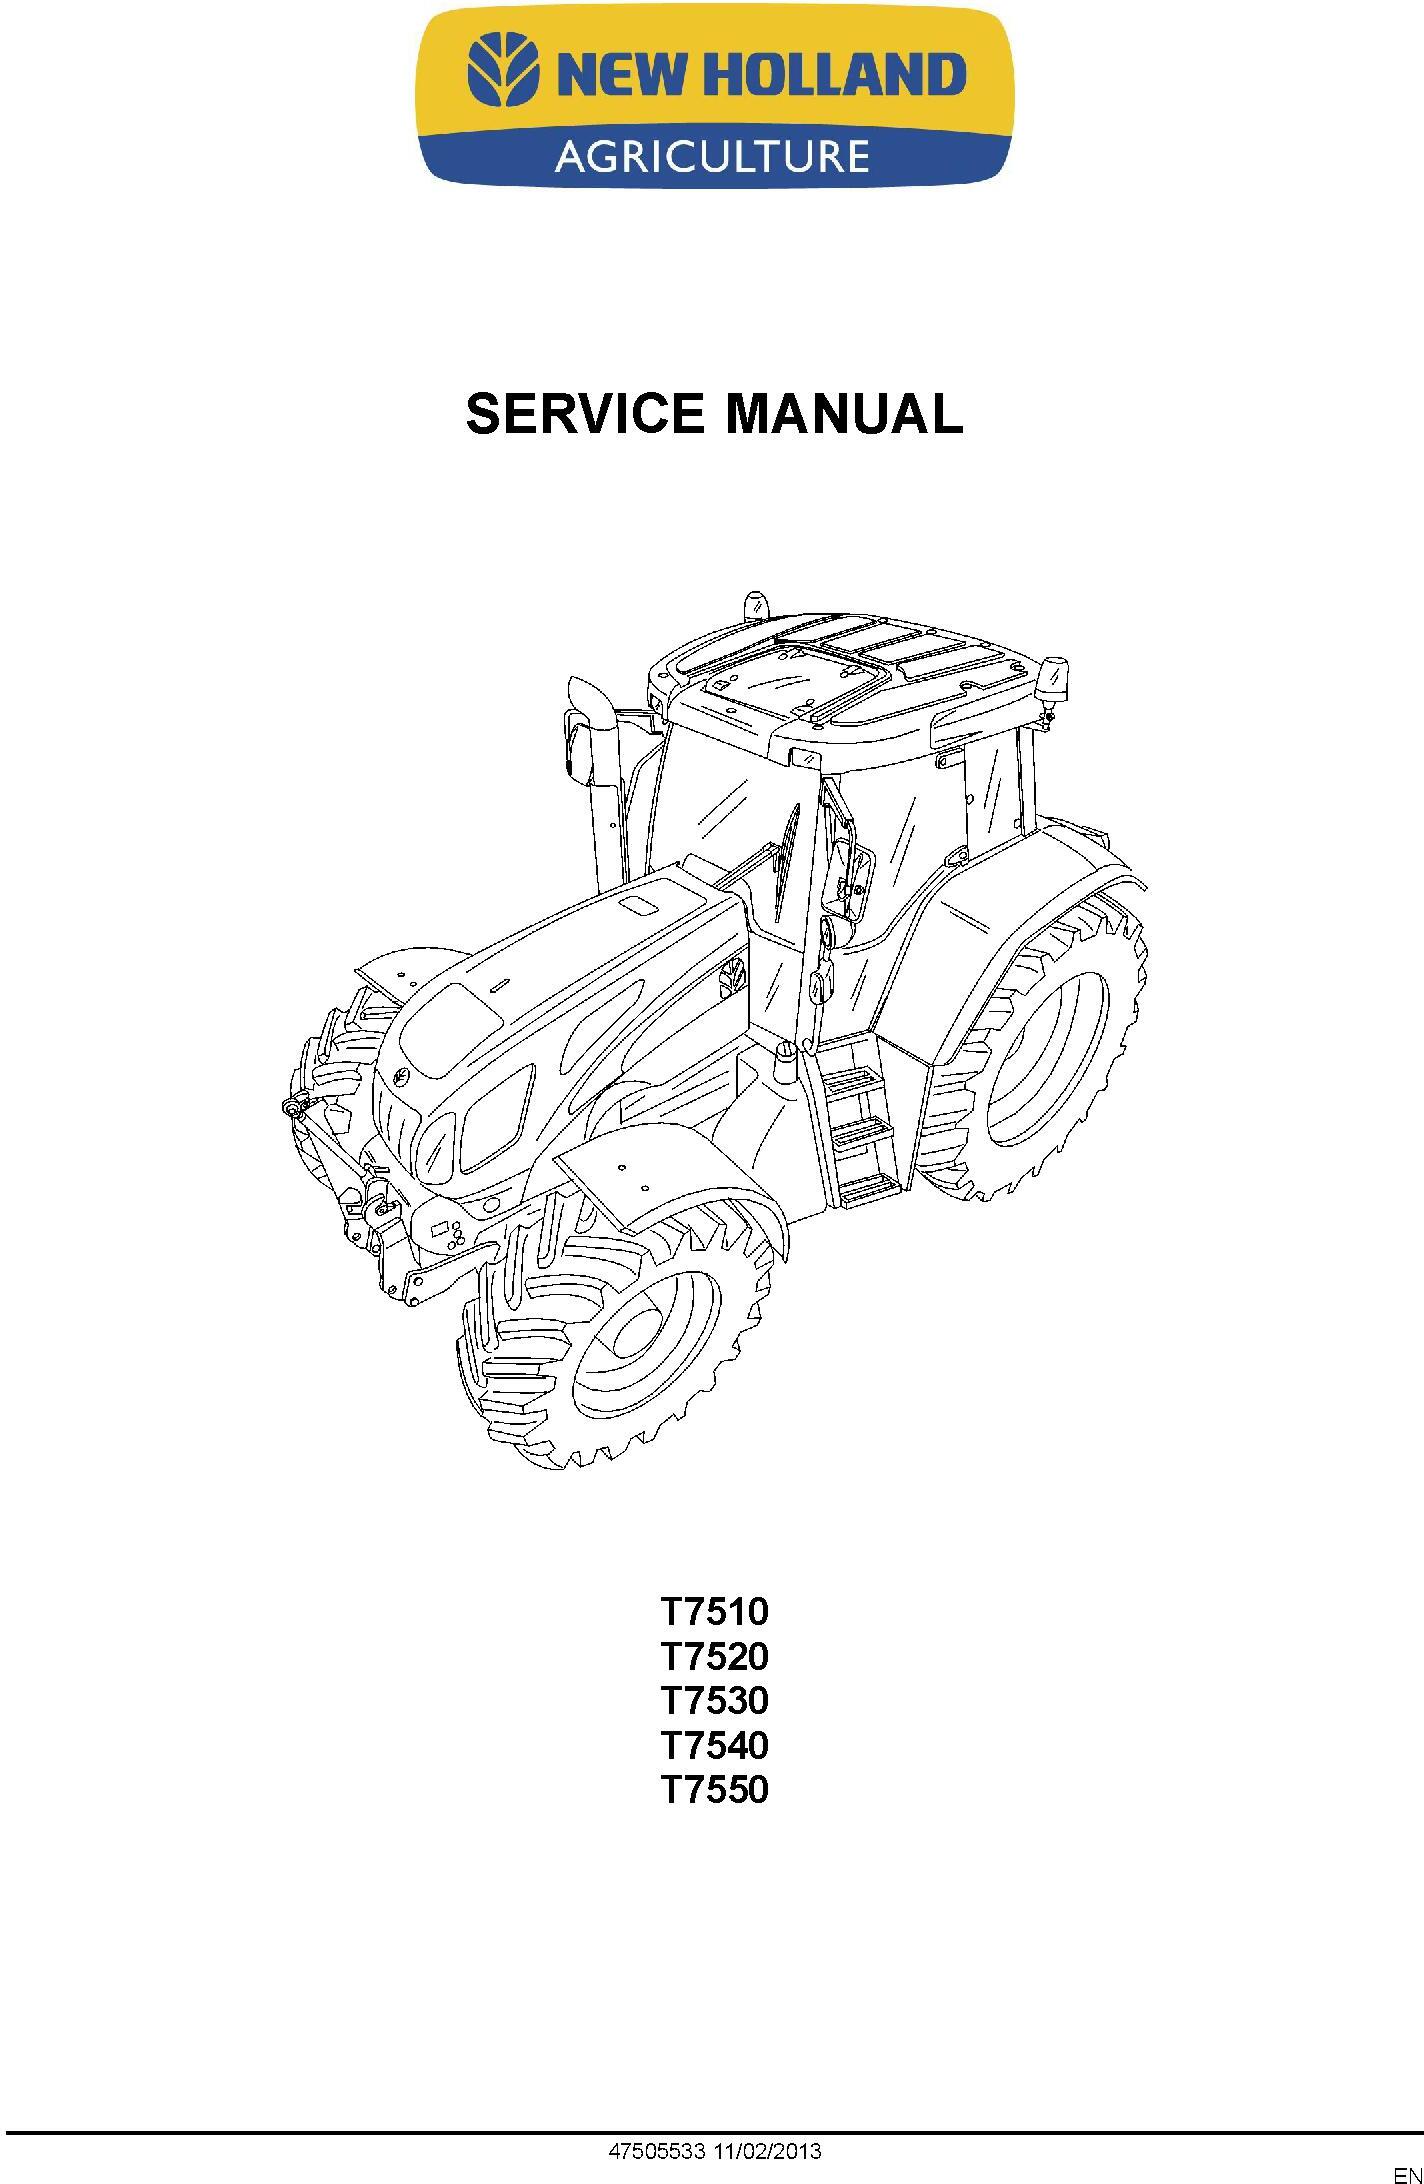 New Holland T7510, T7520, T7530, T7540, T7550 Tractor Service Manual - 1